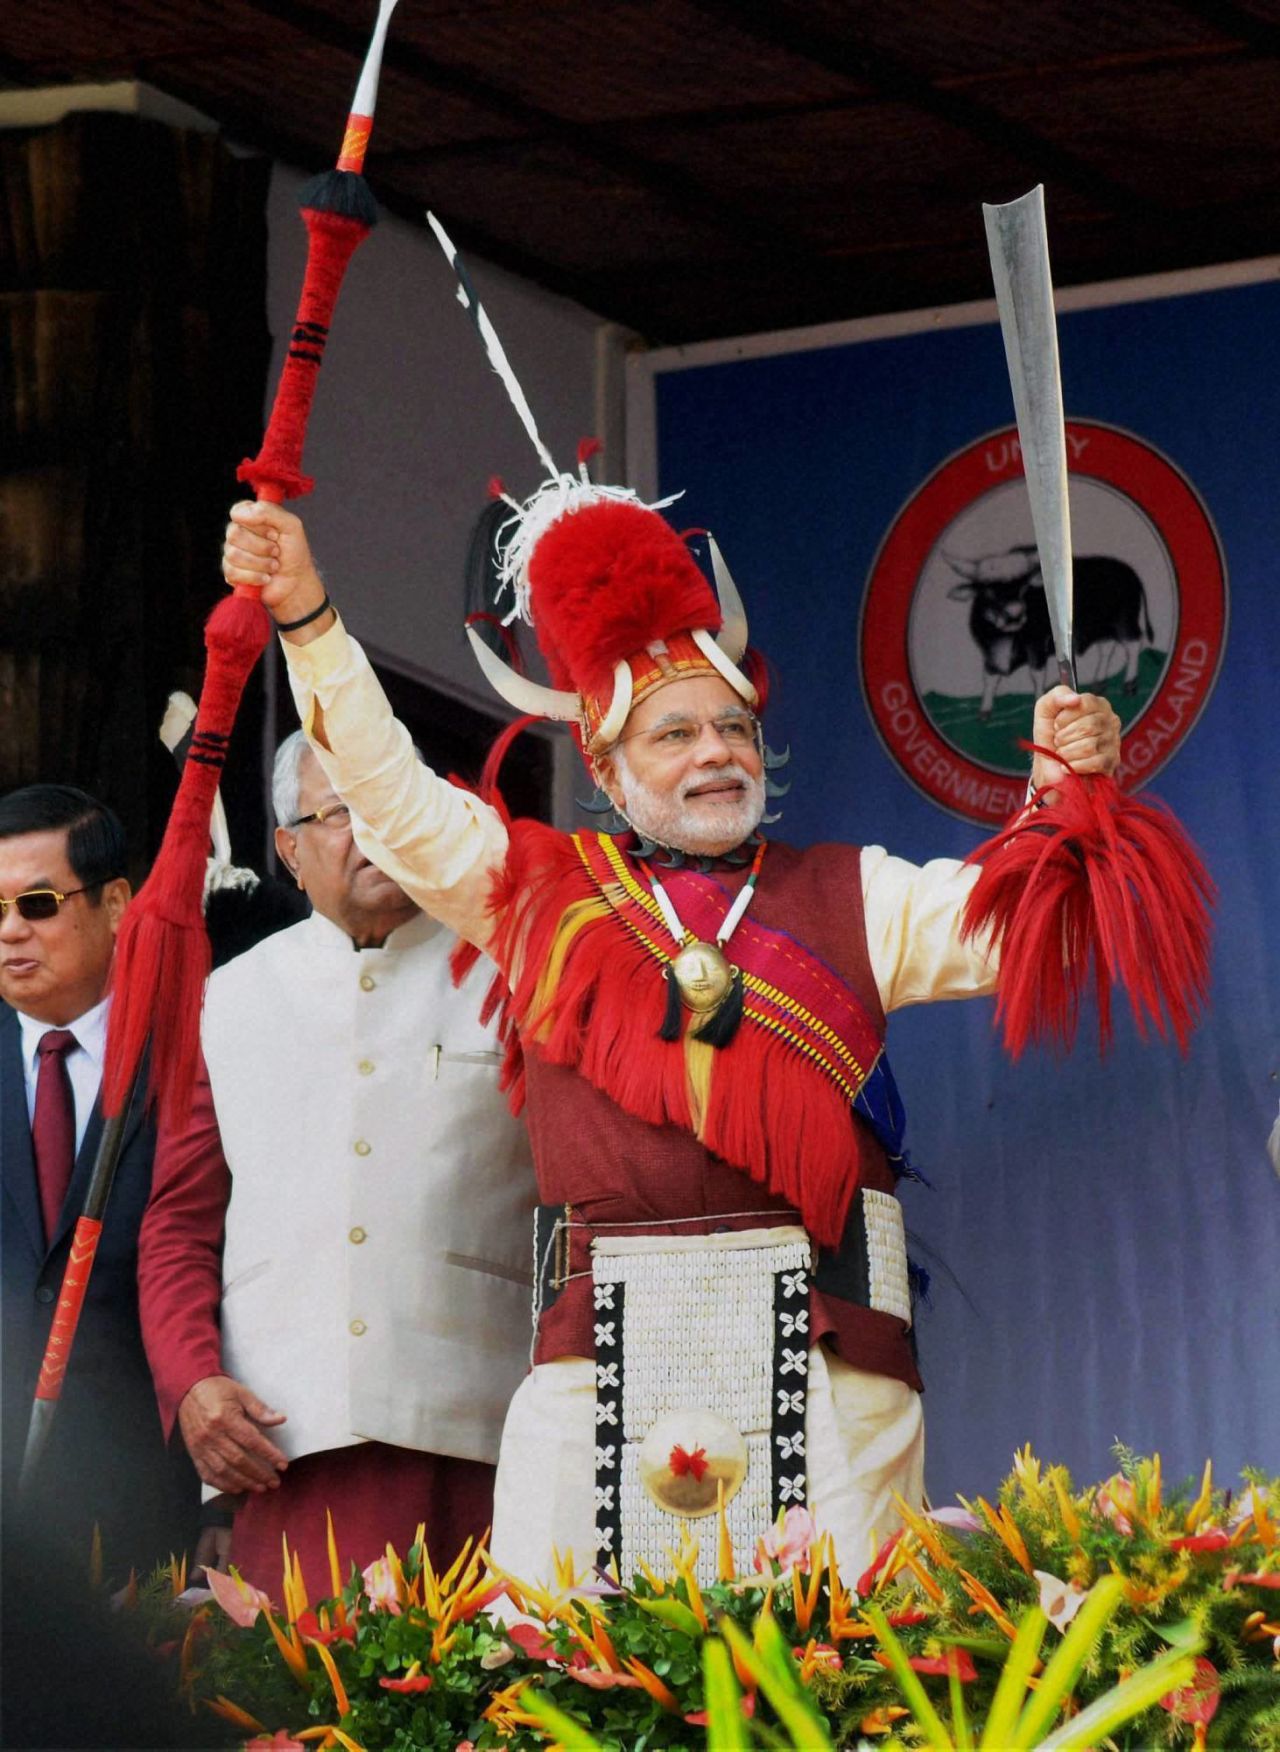 Indian Prime Minister Narendra Modi wears a traditional Naga warrior headgear at the Hornbill festival in Nagaland. Horbill, a bird admired greatly by locals in Nagaland, is symbolically used in these traditional tribal headgears. These headgears are considered symbols of power, position and status. It can only be worn if one has inherited or earned the right.